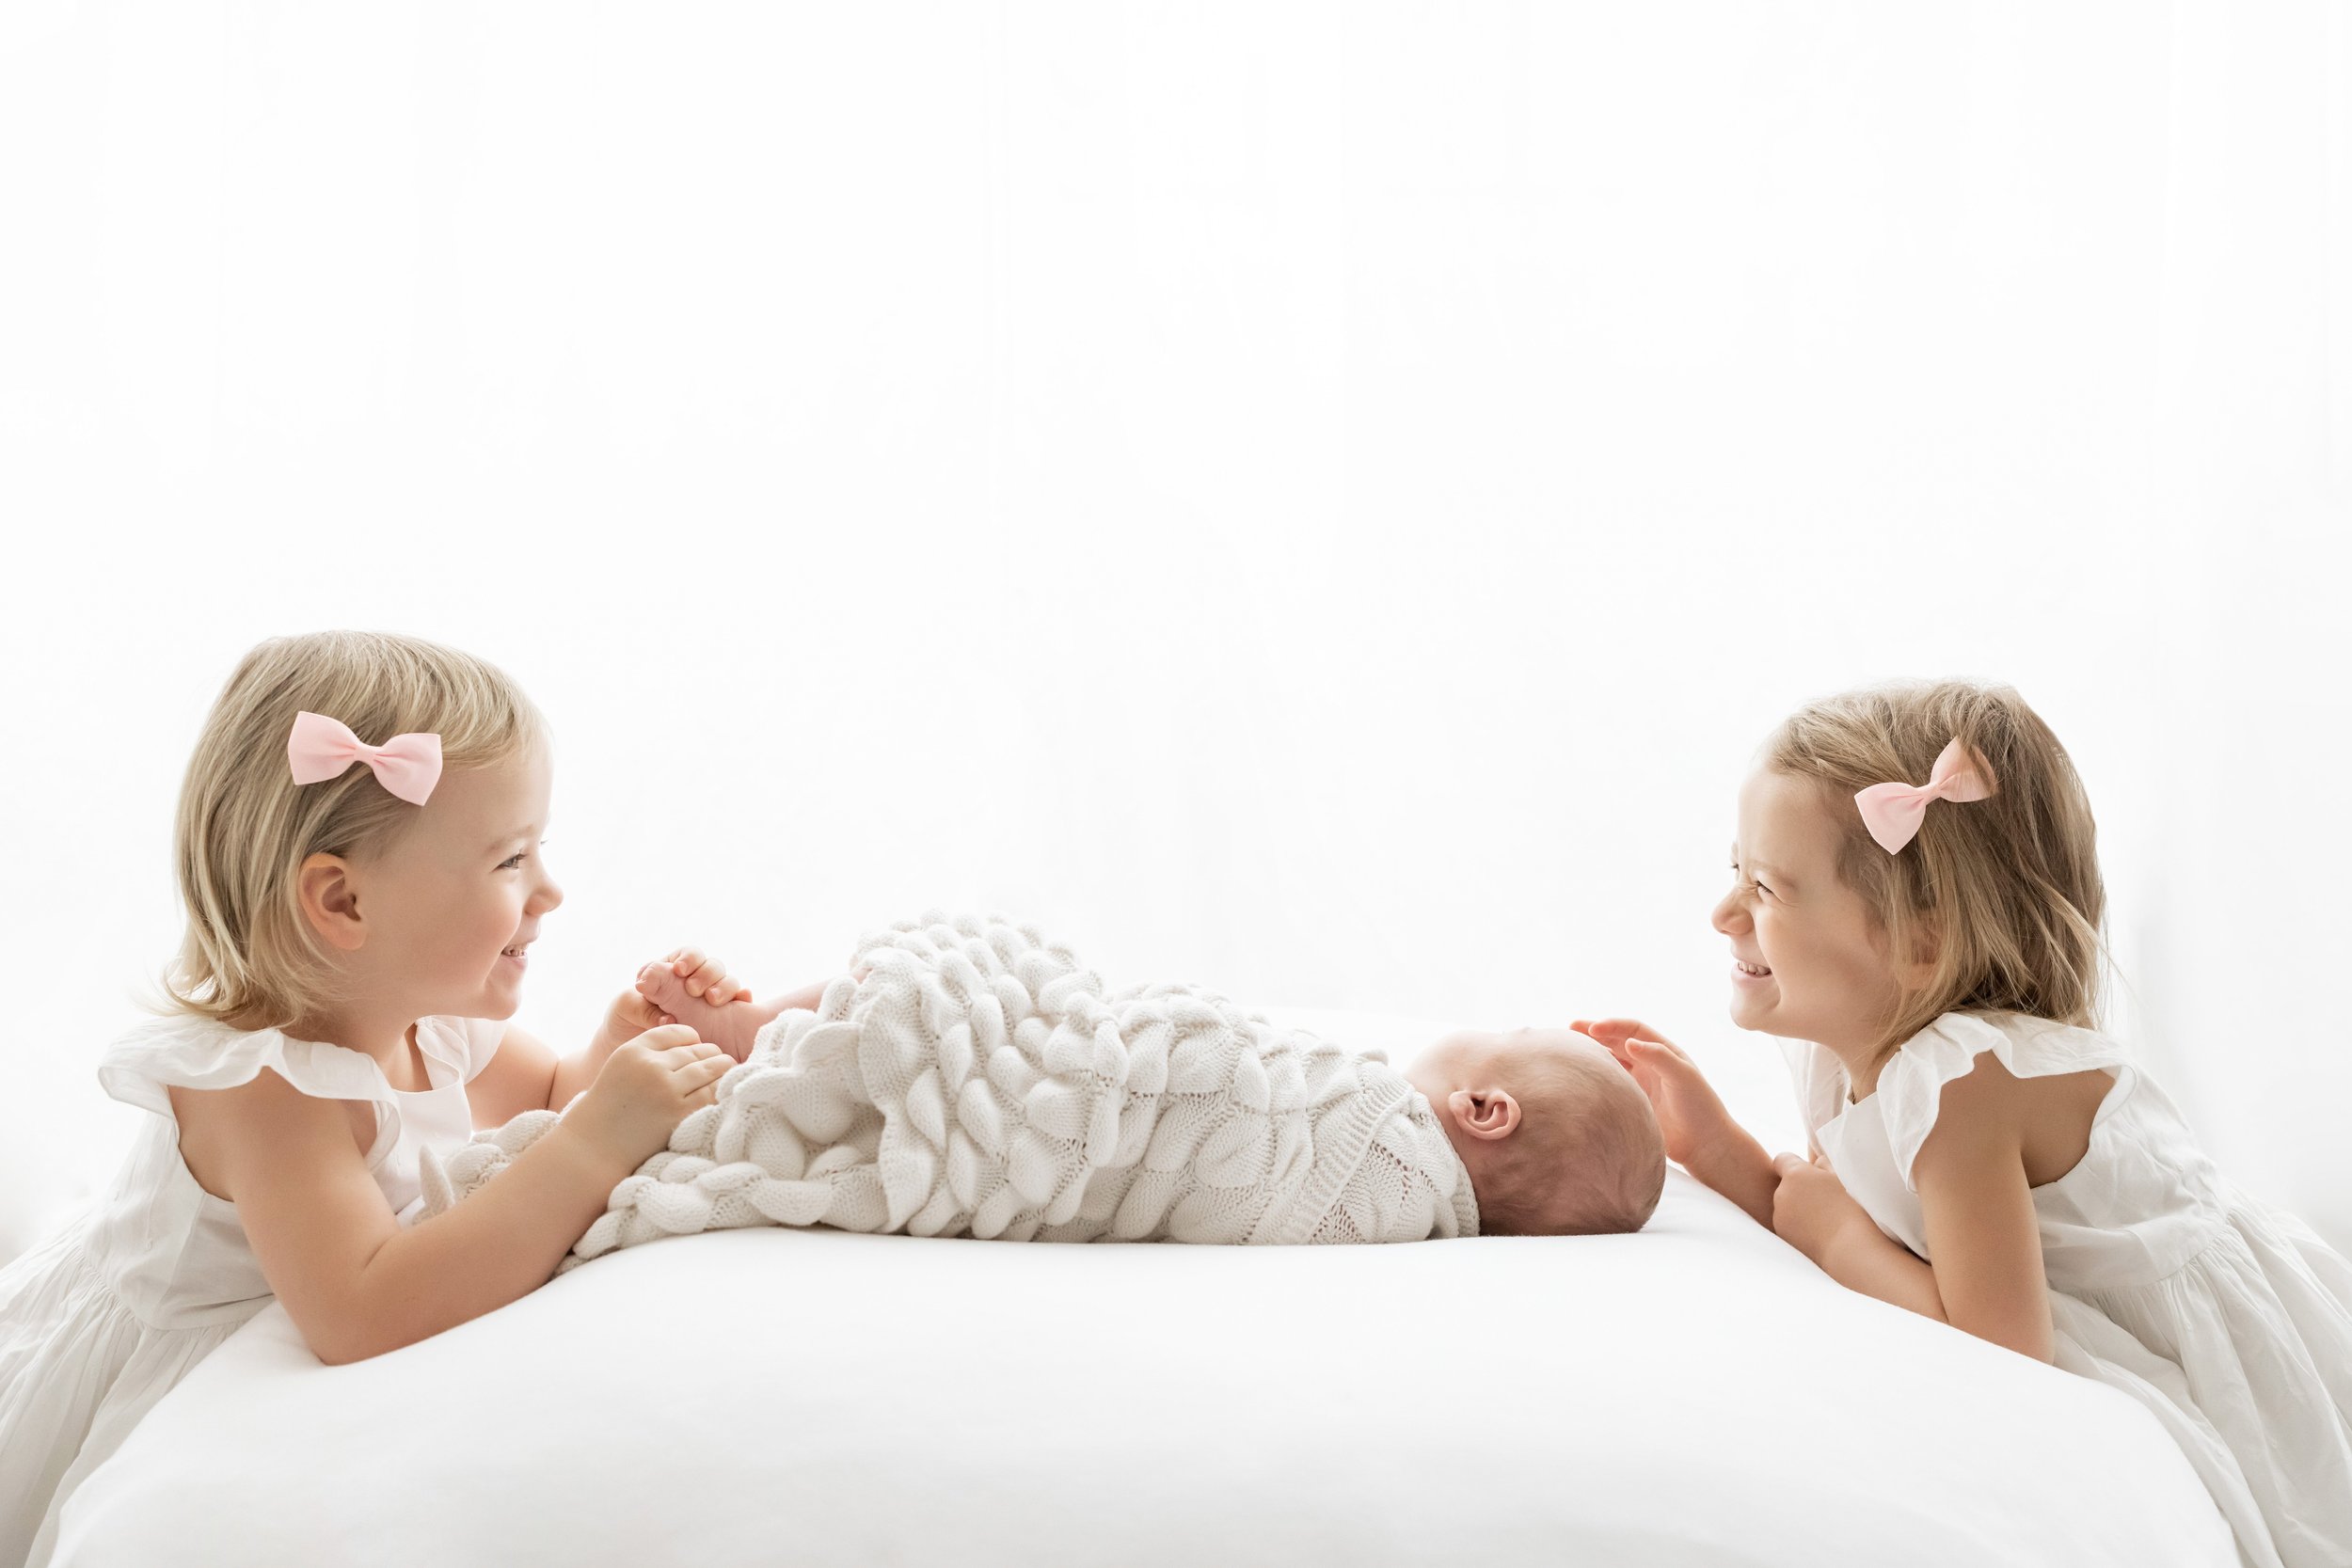  Family newborn portrait of an infant lying on his back swaddled to his chin in a soft white blanket and his two sisters kneel next to the bed, one at his head and the other at his feet taken in an Atlanta studio utilizing natural light. 